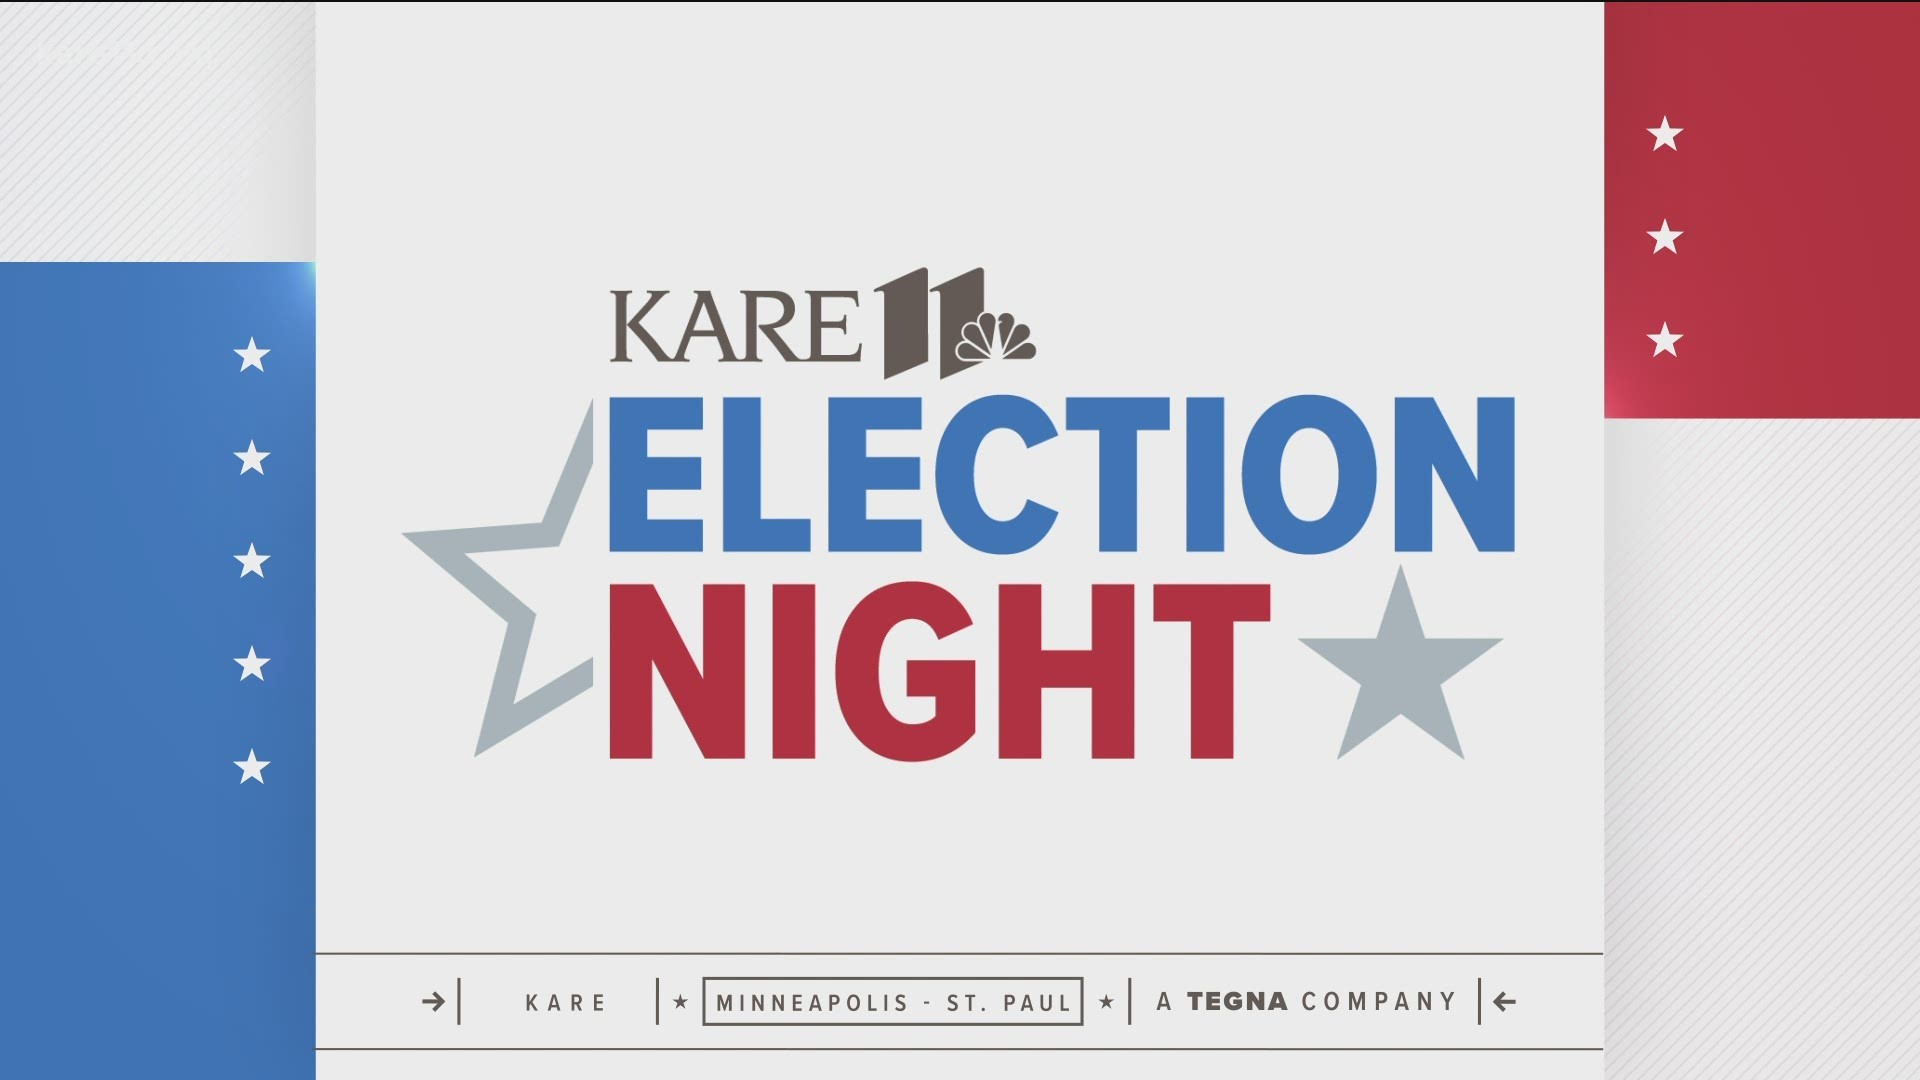 Our team coverage on the local and national races as results begin to filter in on Election Night 2020.